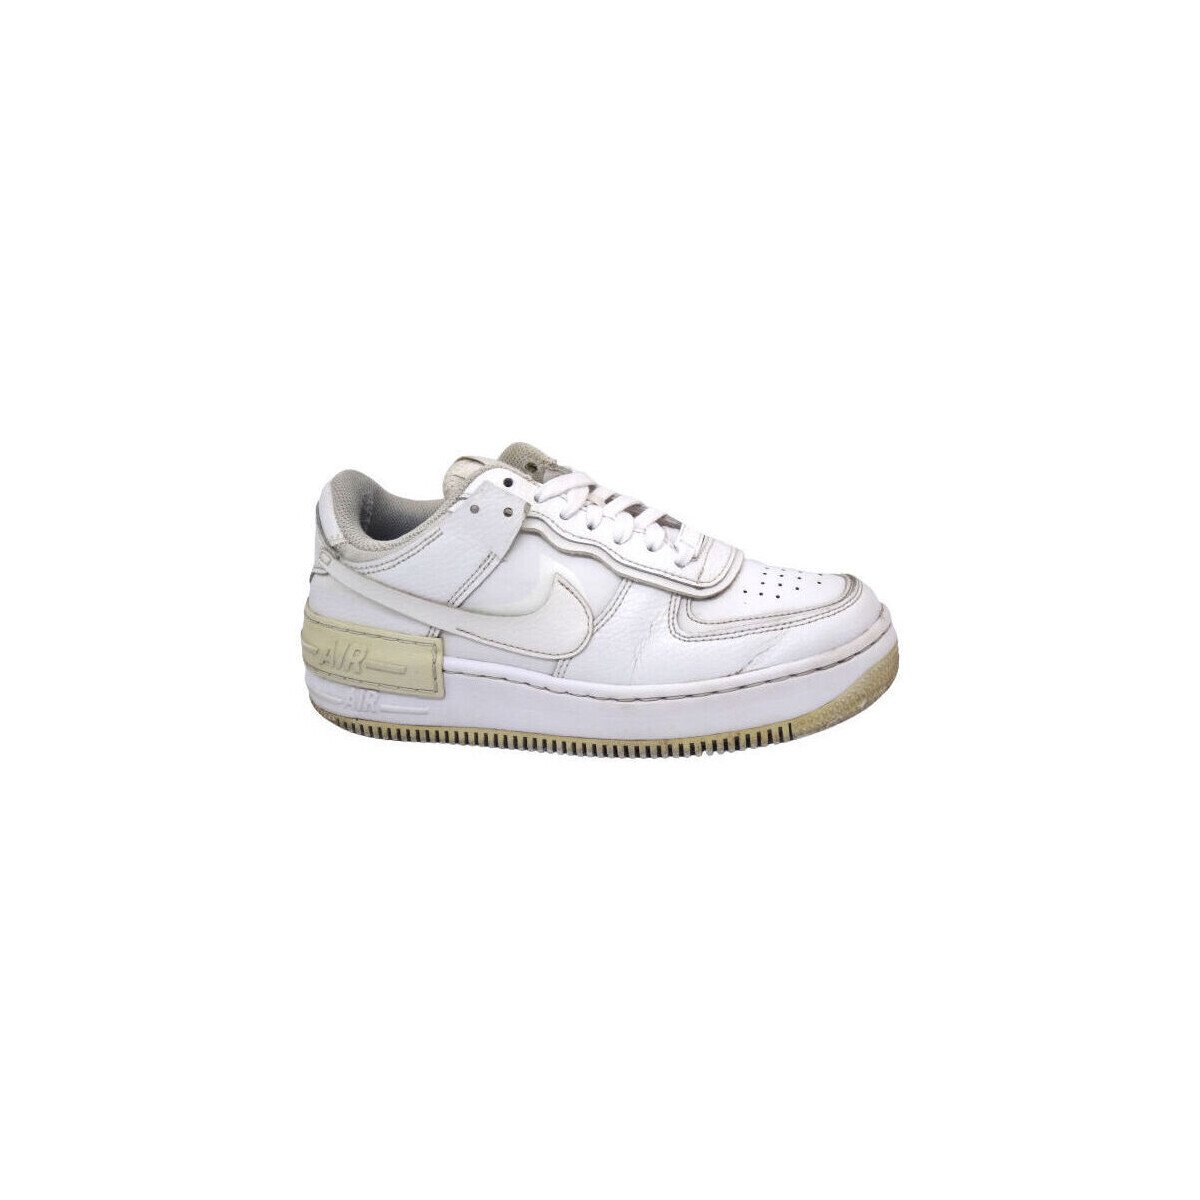 Basket Nike Reconditionne Air Force 1   26560782 1200 A